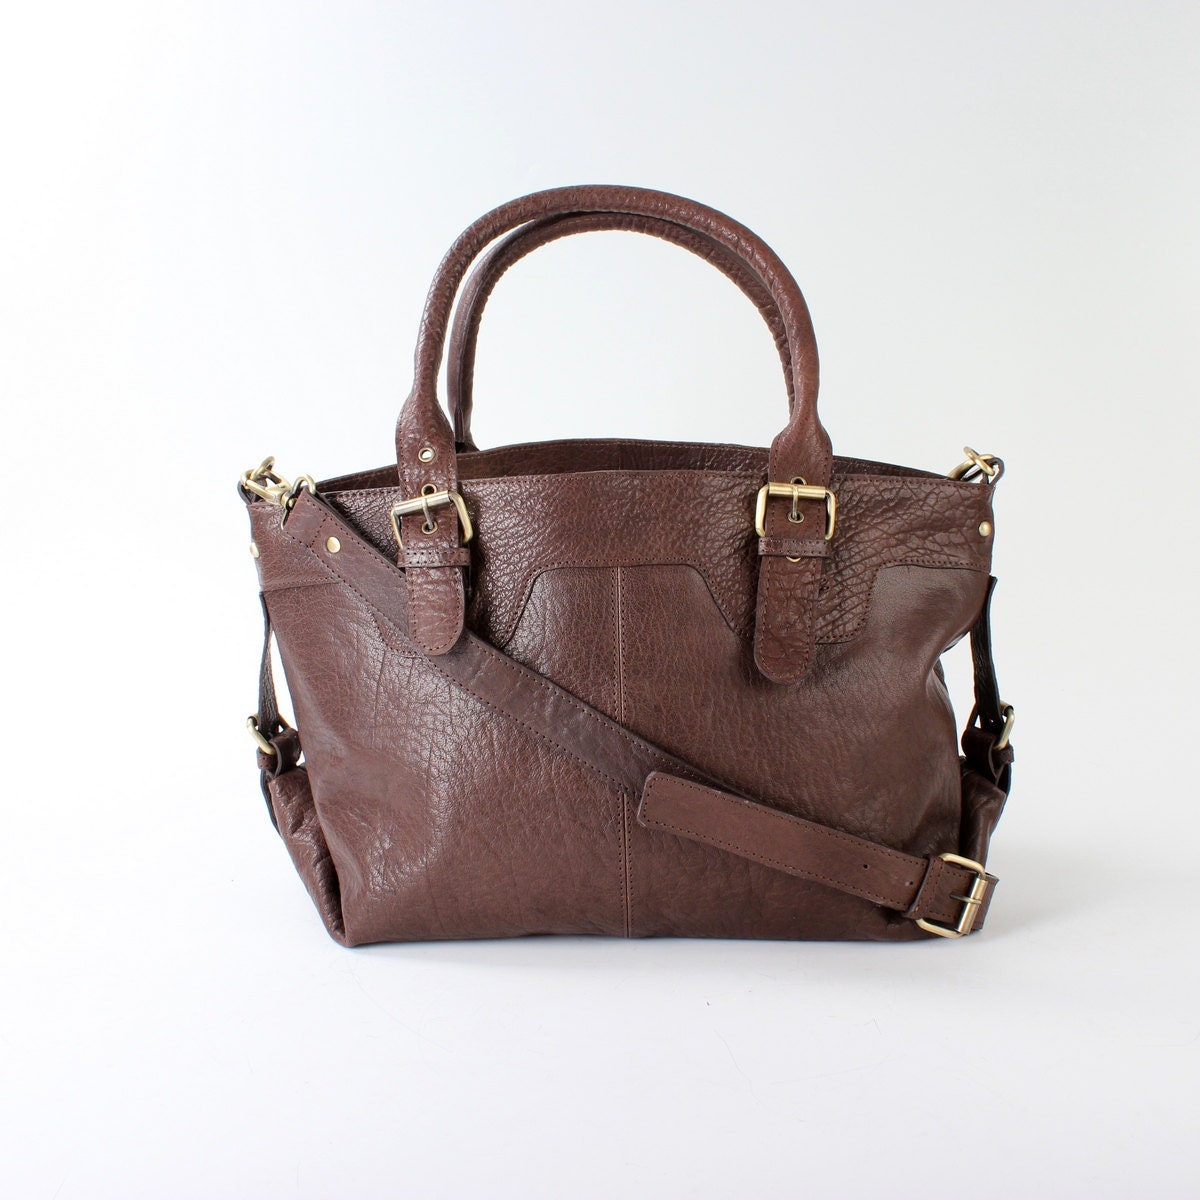 Large Leather Handbag Purse in Chocolate Brown